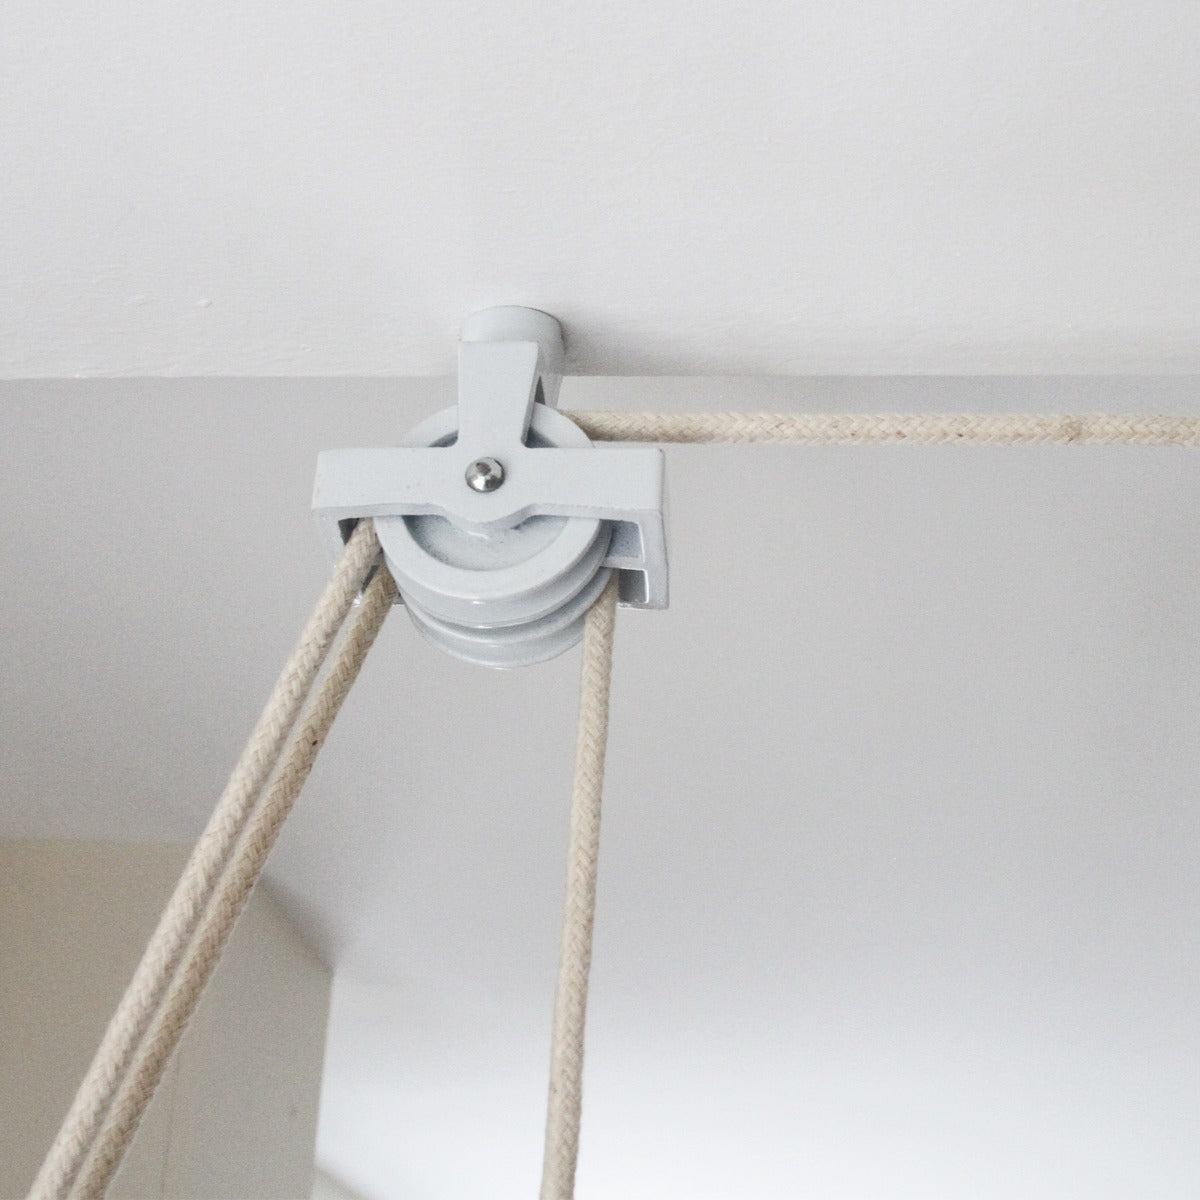 Clothing Airer Ceiling Pulley - White - 2.4m